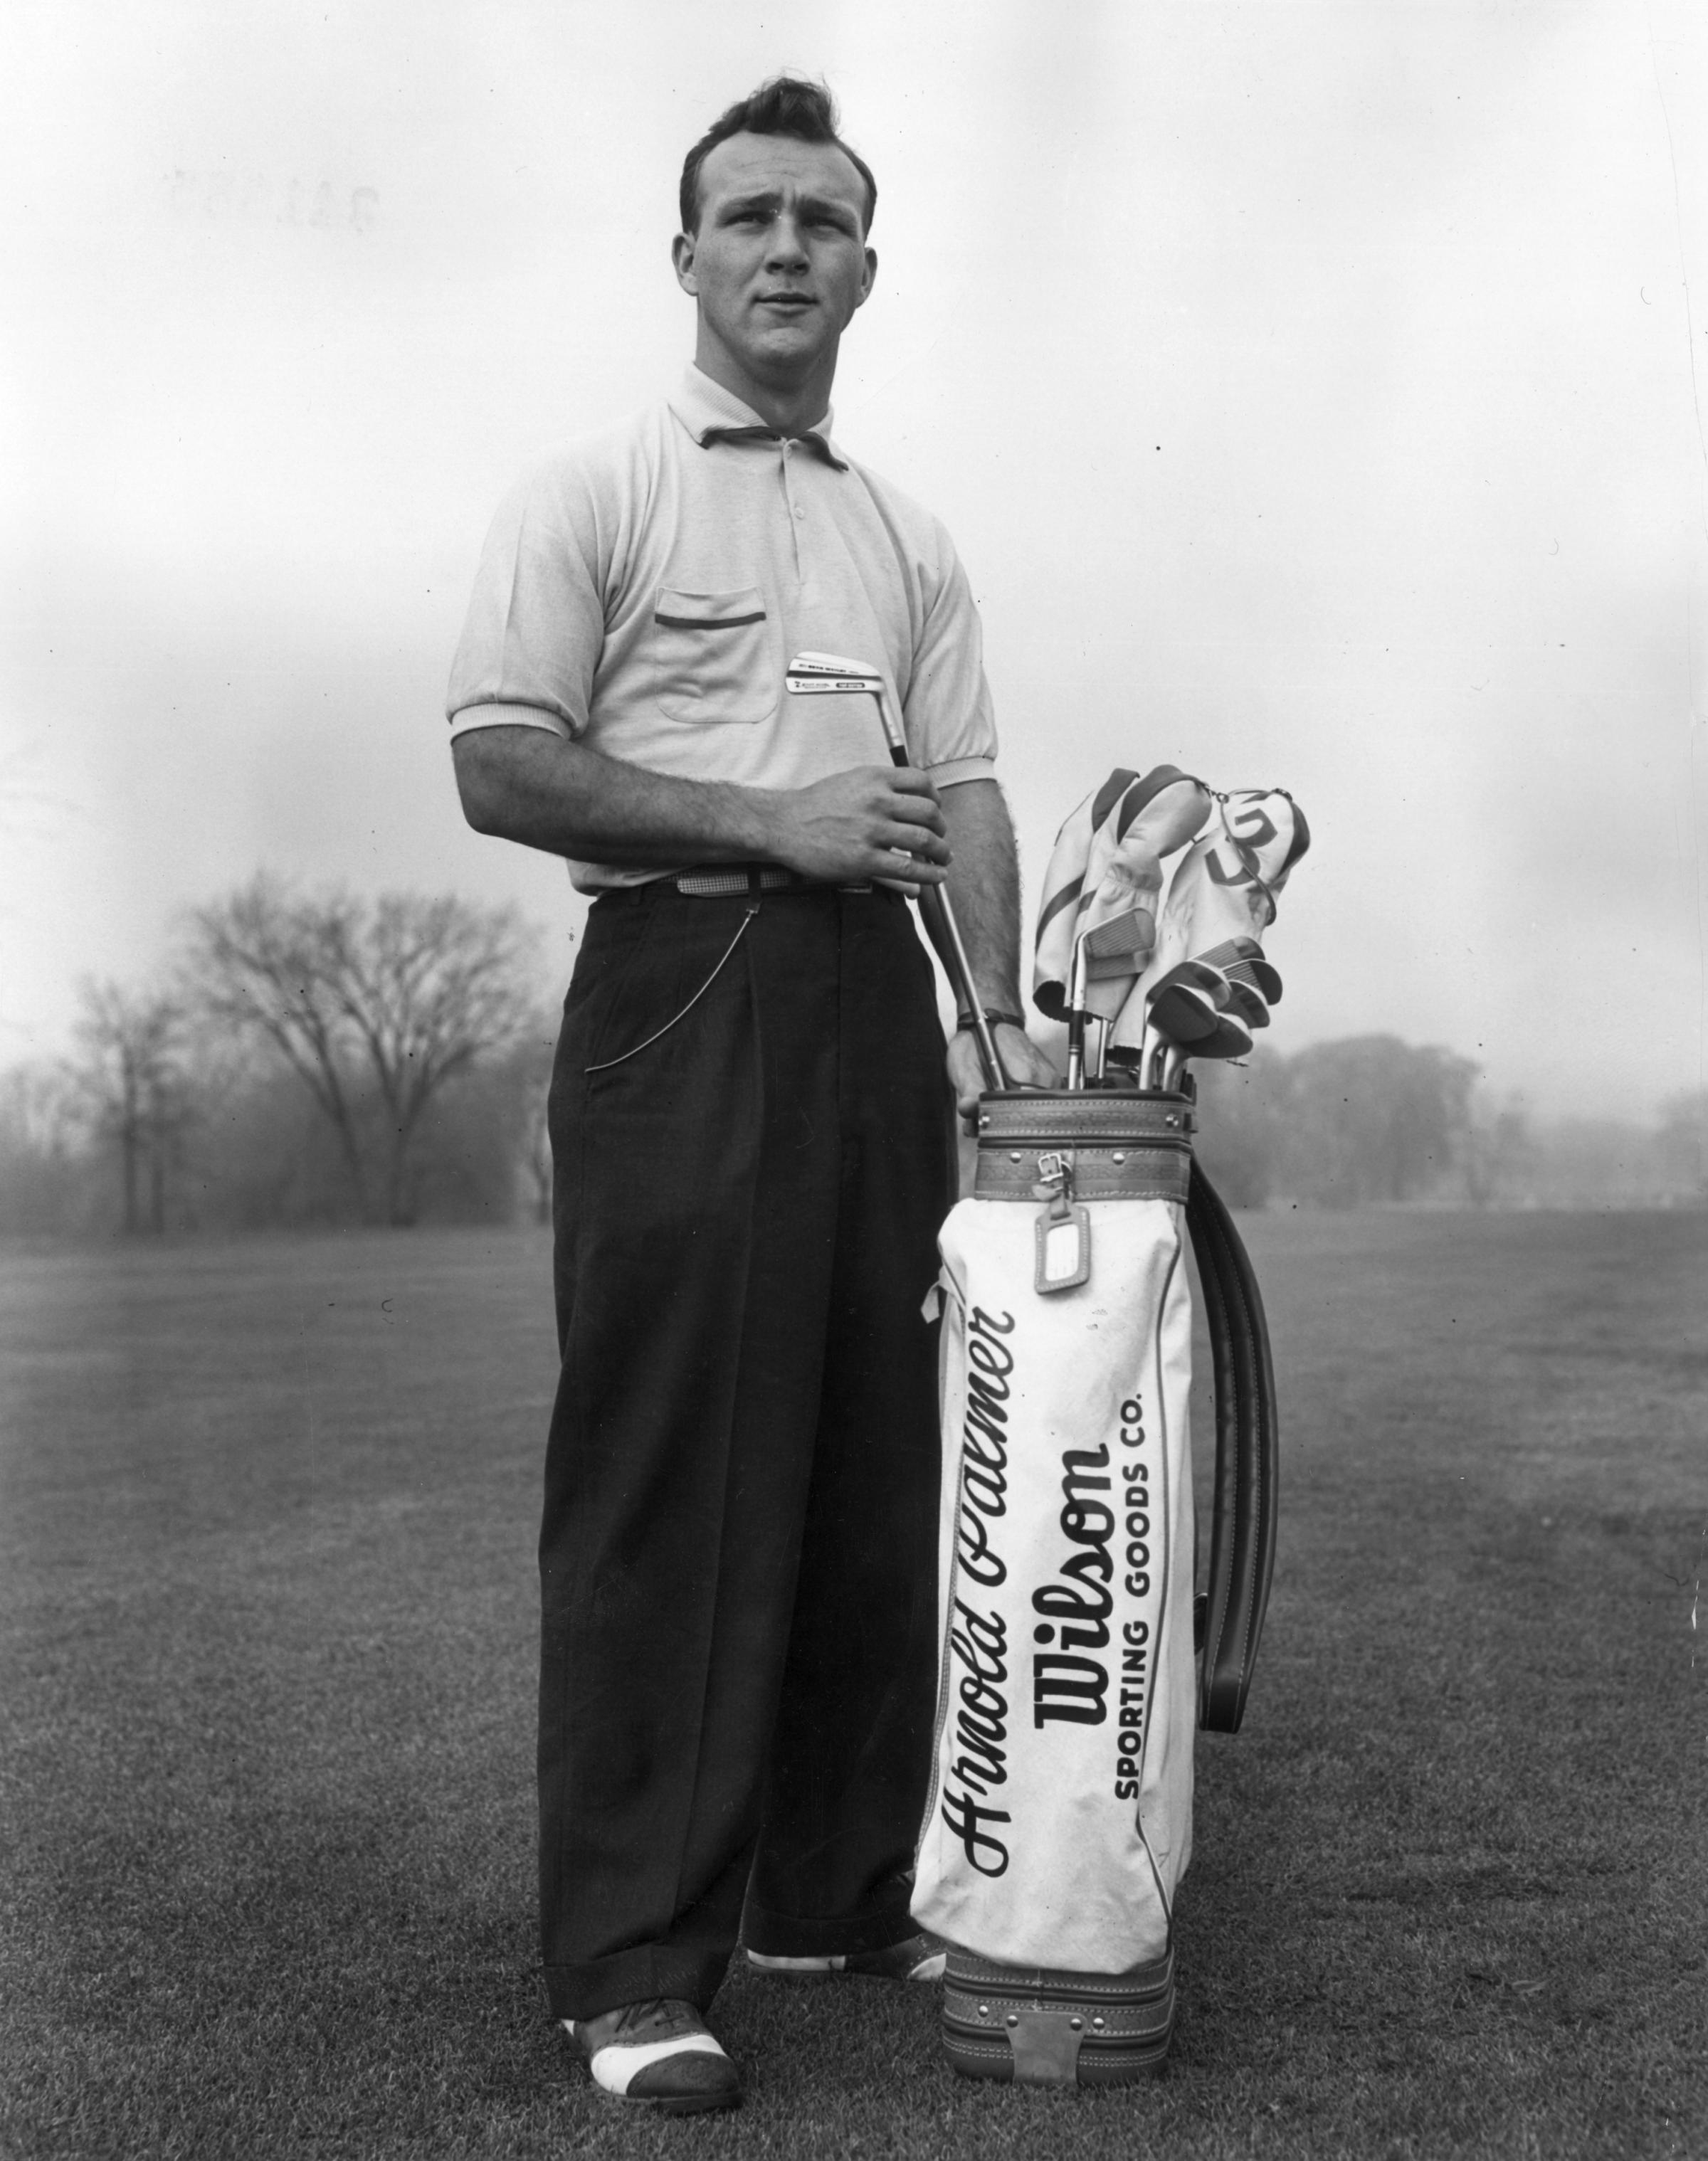 A portrait of American golfer Arnold Palmer pulling a driving iron from a golf bag on a golf course circa 1953. Palmer died Sunday in Pittsburgh. He was 87.